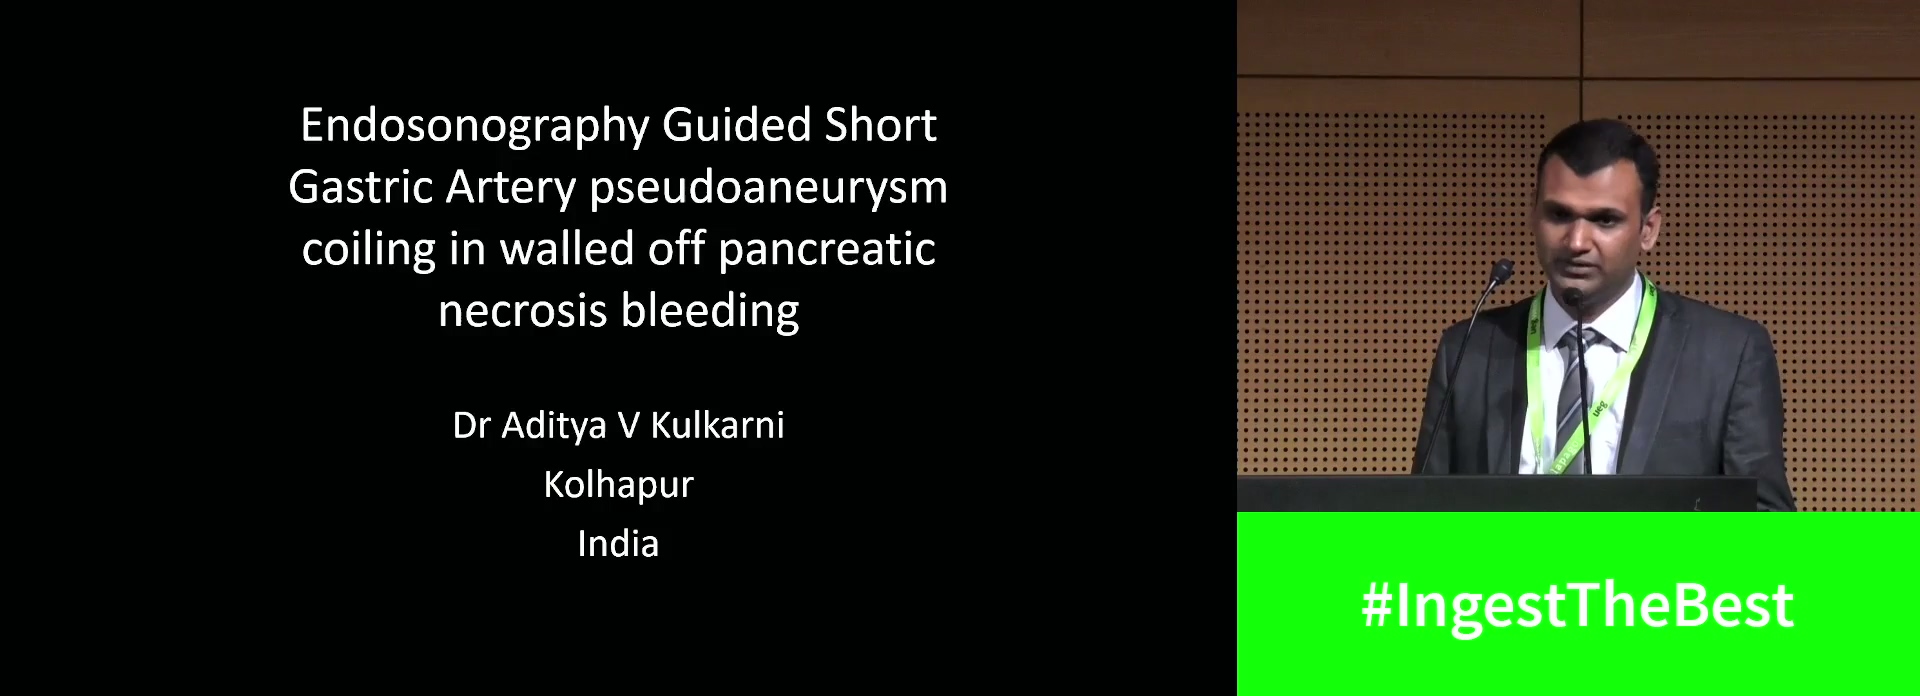 ENDOSONOGRAPHY GUIDED SHORT GASTRIC ARTERY PSEUDOANEURYSM COILING IN WALLED OFF PANCREATIC NECROSIS BLEED